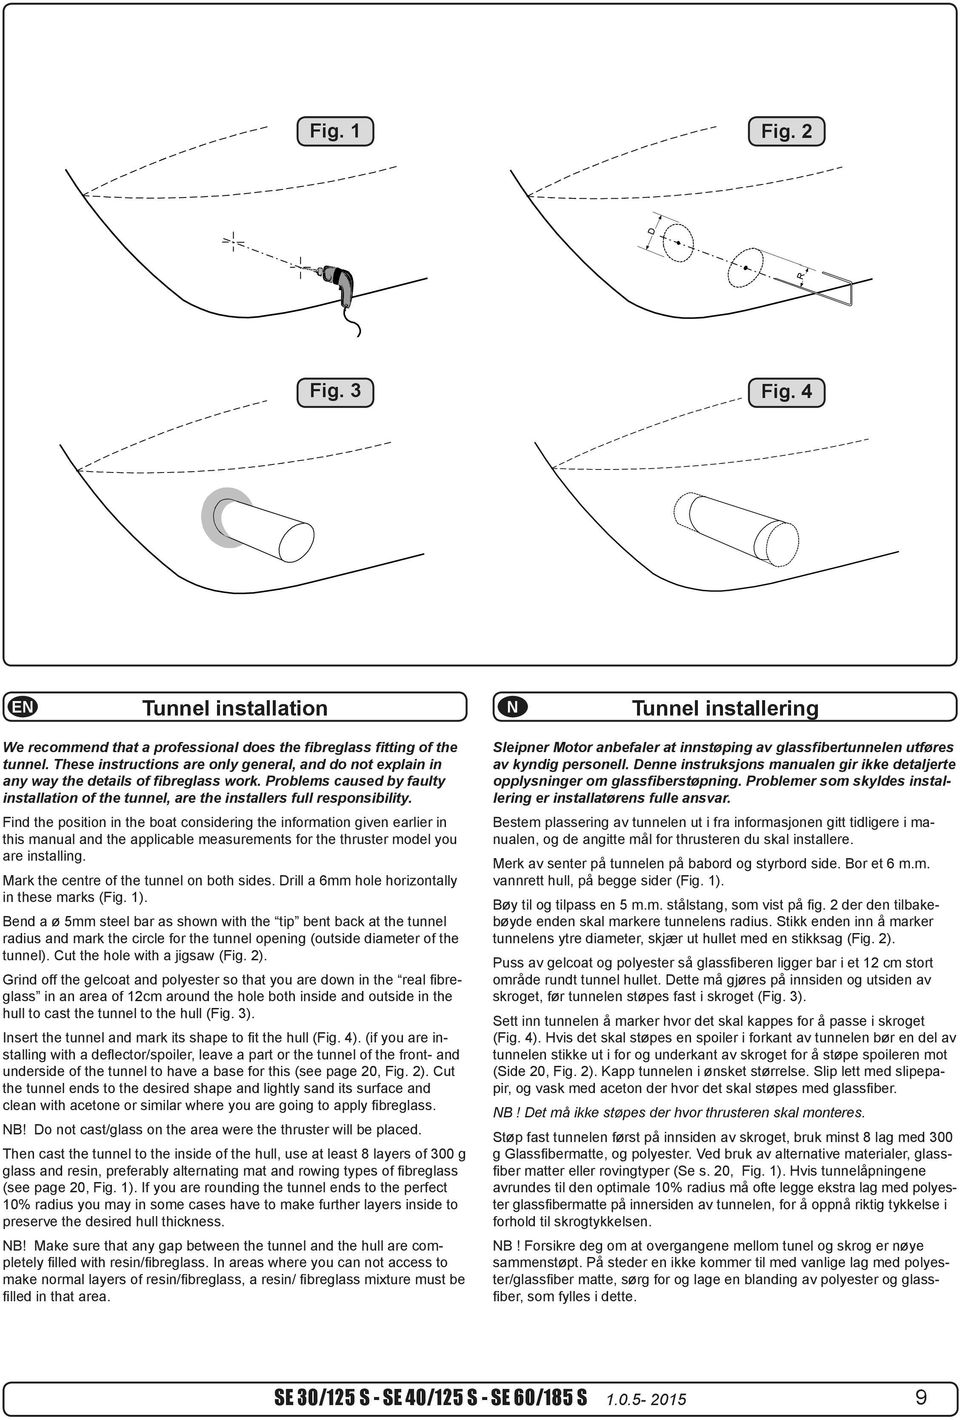 Find position in boat consiing information given earlier in this manual applicable measurements for thruster model you are installing. Mark centre of on both sides.